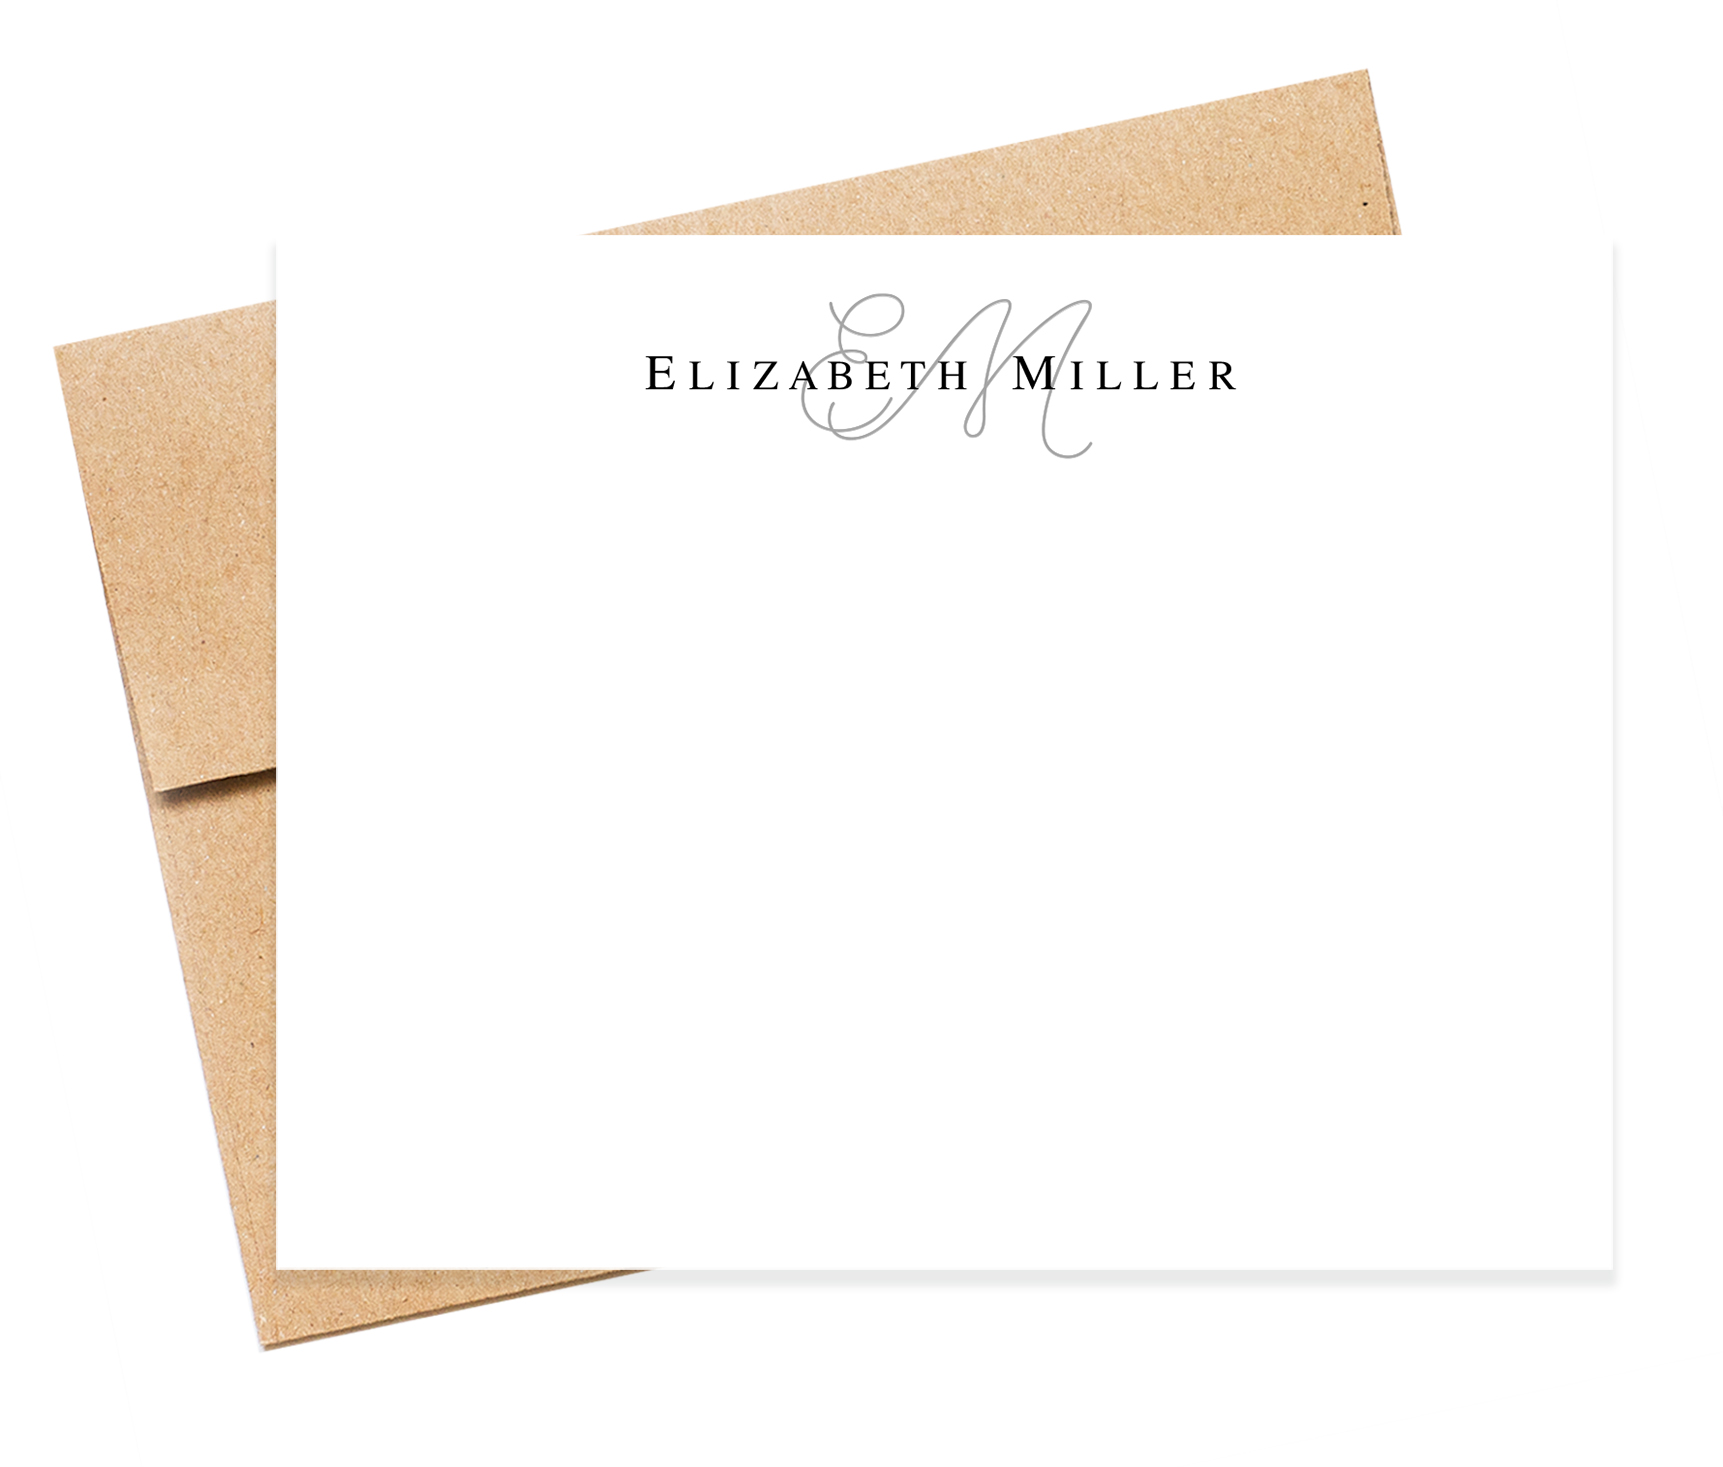 Personalized Stationary Note Cards and Envelopes for Women